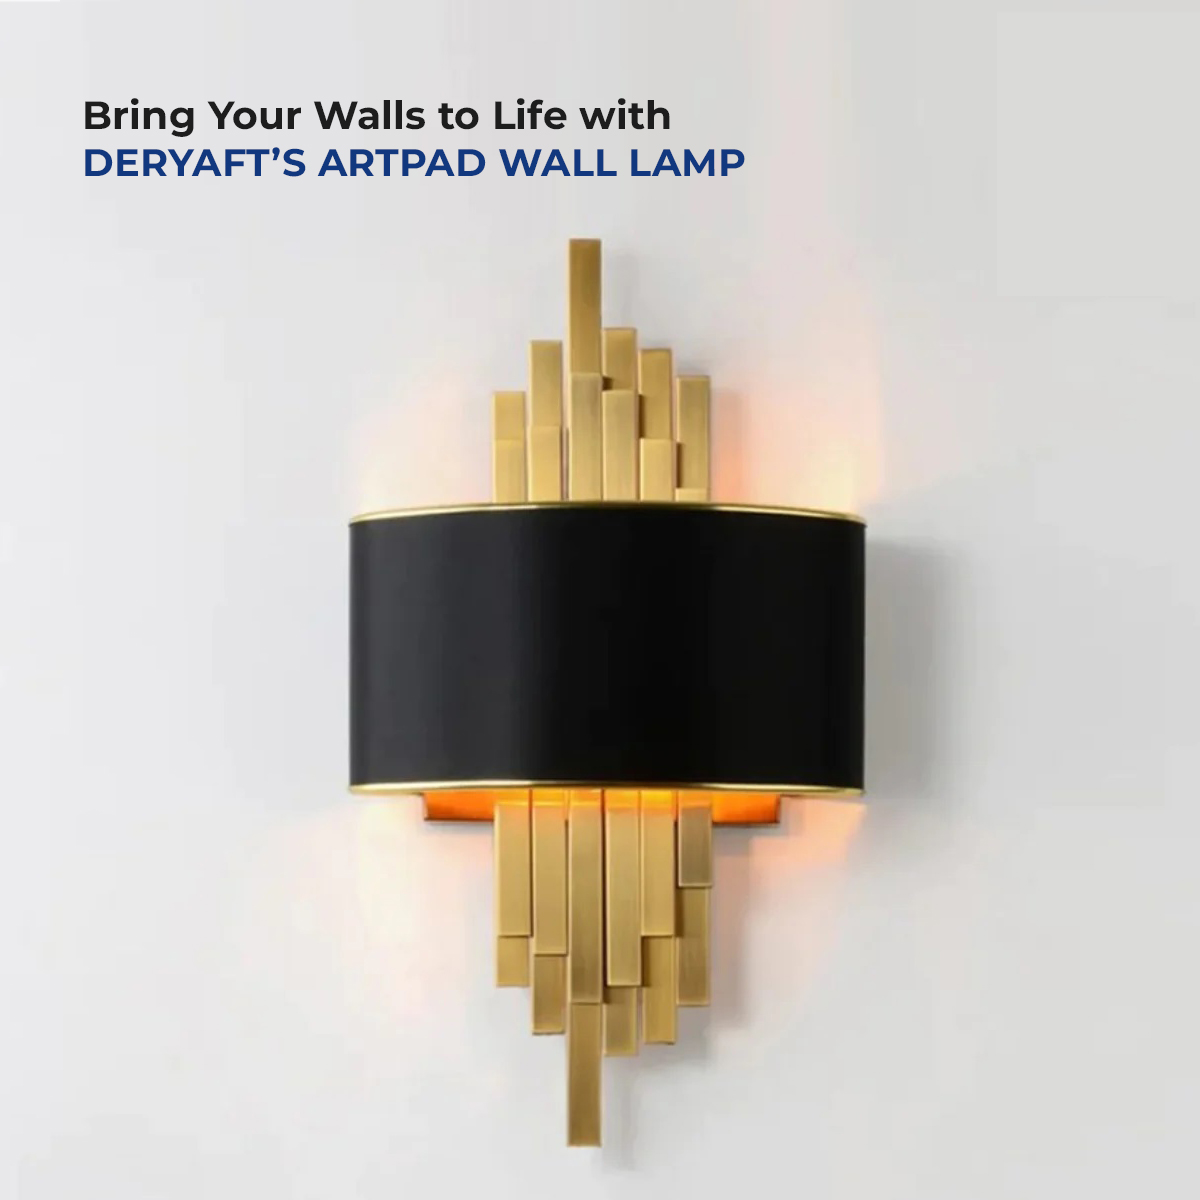 Enhance the beauty of your indoor space!

Shop Deryaft’s Artpad wall lamp now and add a touch of modern elegance in your space!

Explore now!

bitly.ws/CWe9

#Deryaft #walllamp #artpad #homedecor #interior #stylish #space #livingstyle #onlineshopping #homeessentials